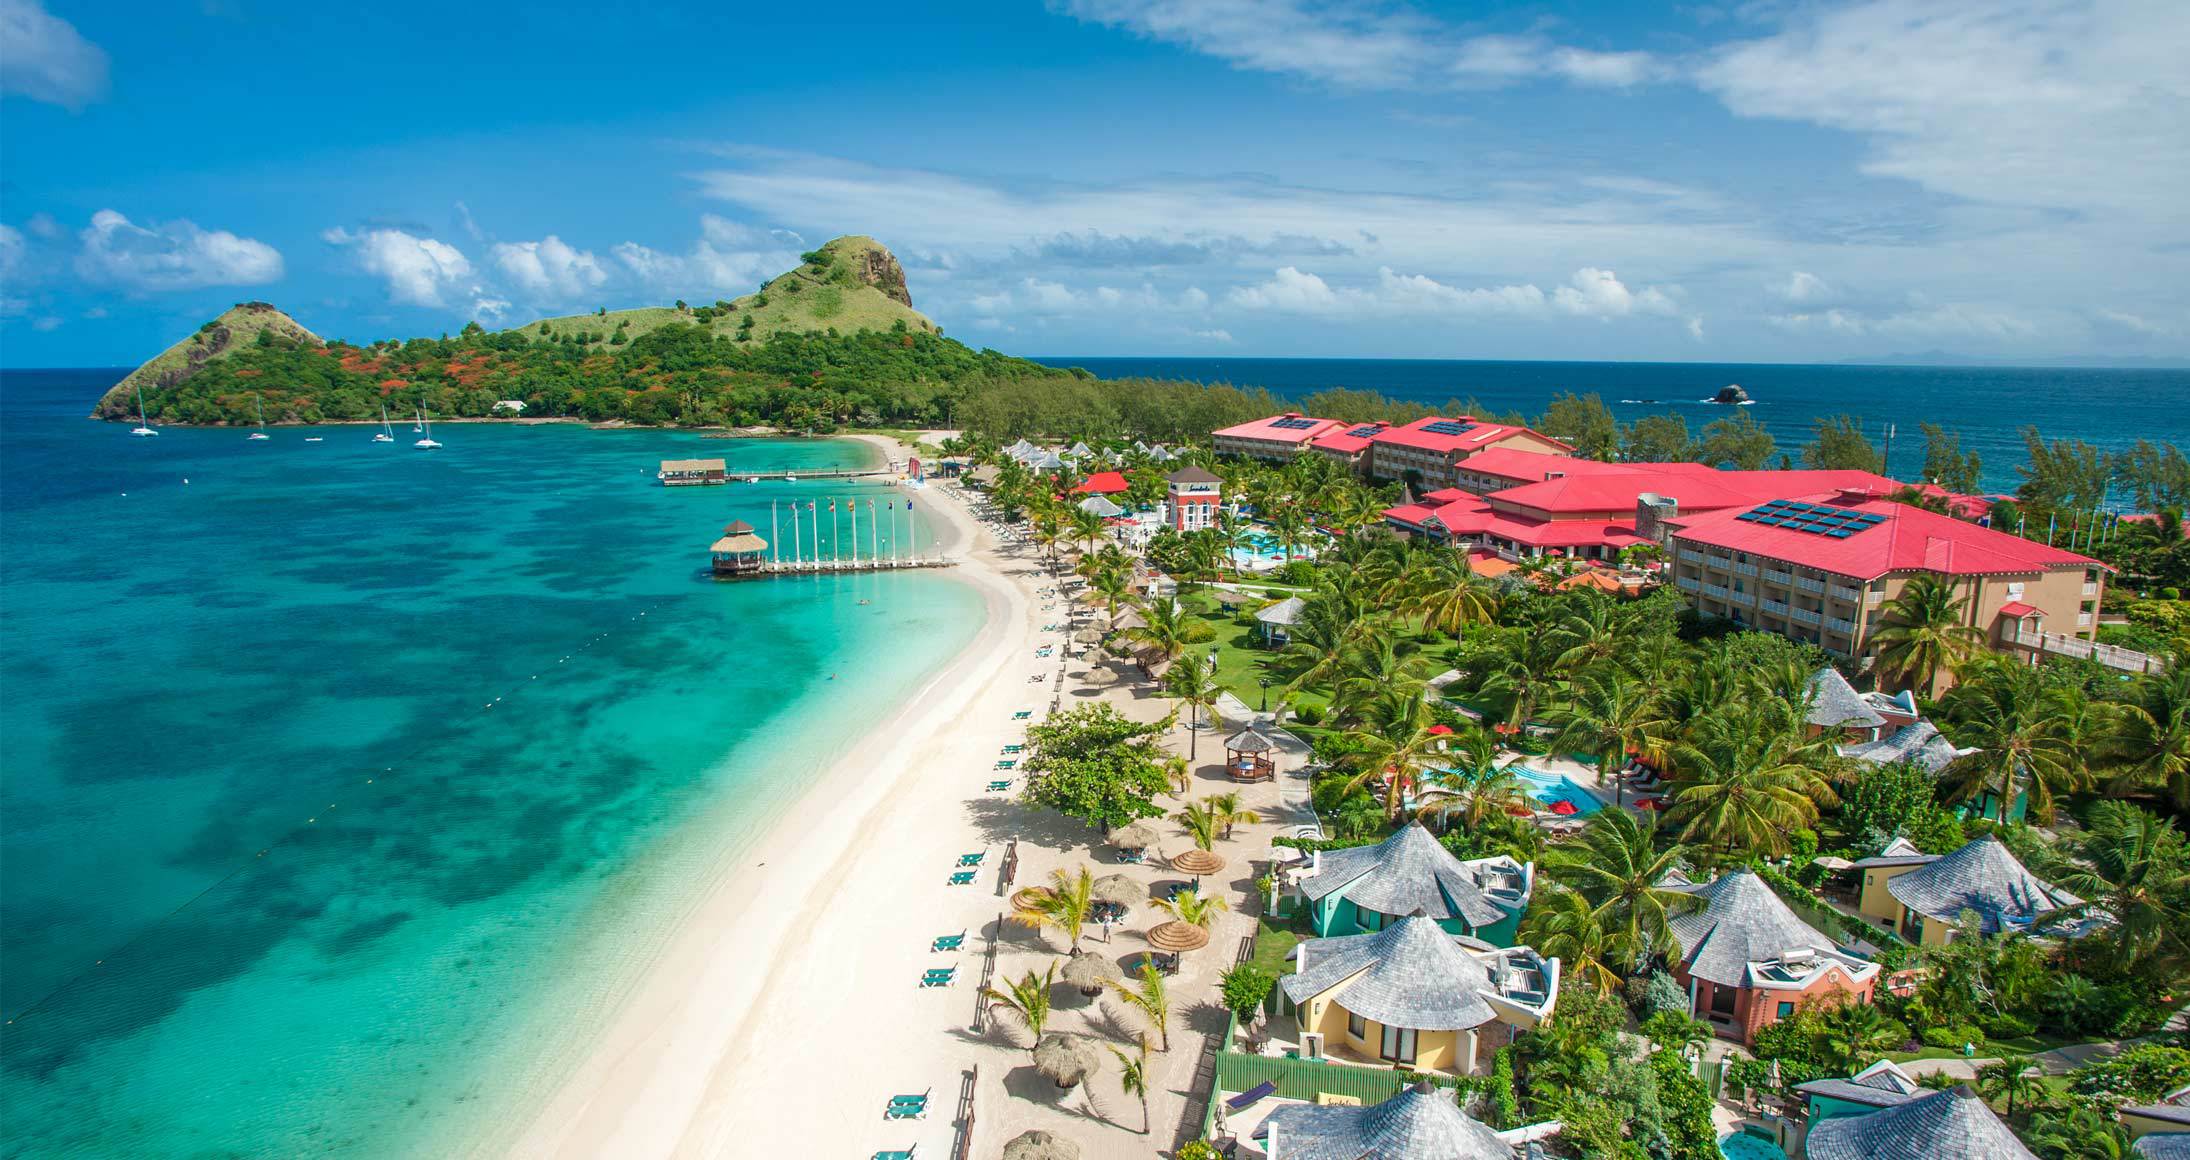 Sandals St. Lucian: All-Inclusive Resort In Rodney